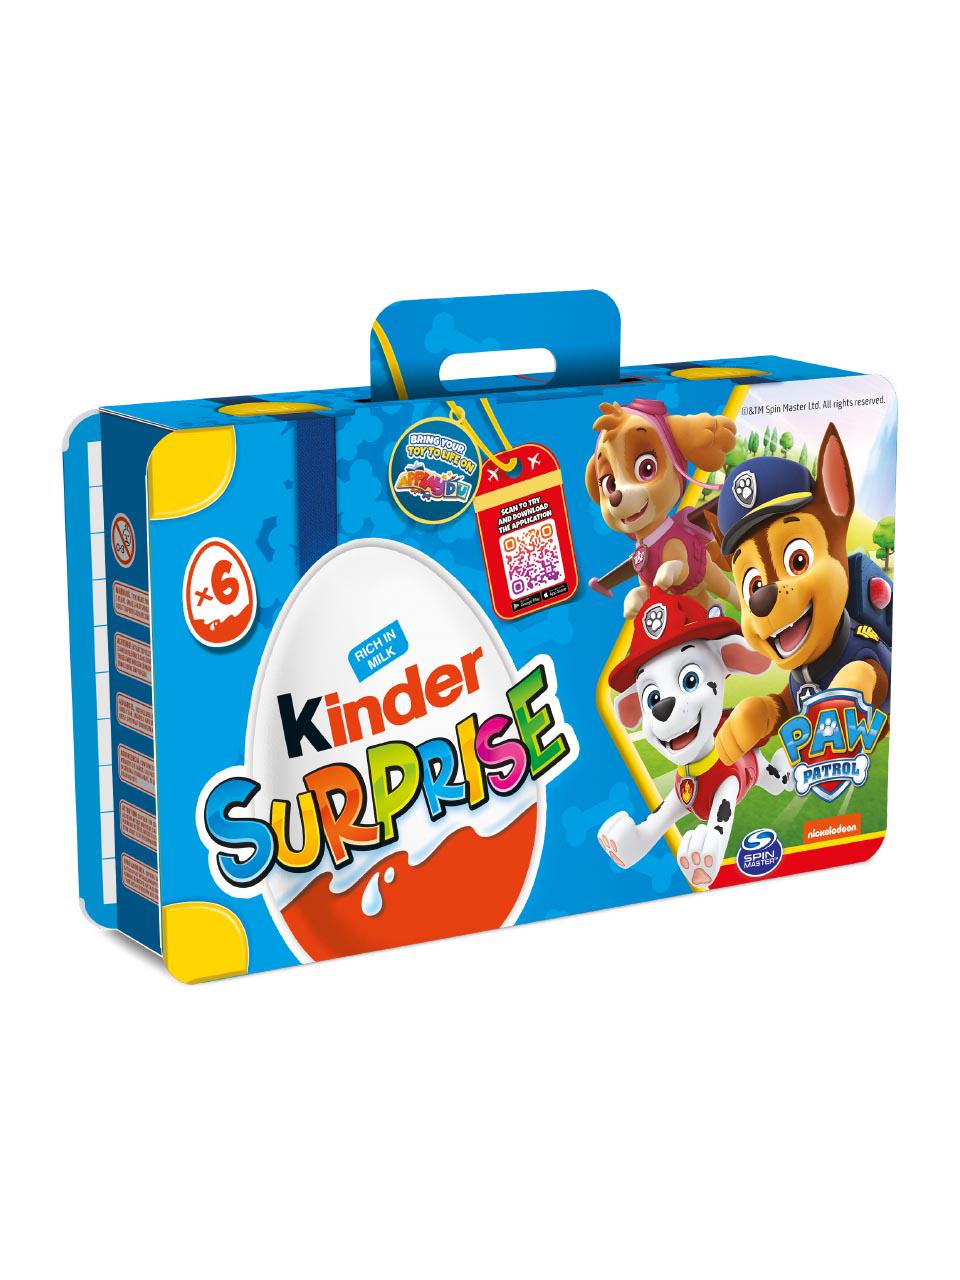 Kinder in the luggage-shaped case with toys | Frankfurt Airport Shopping